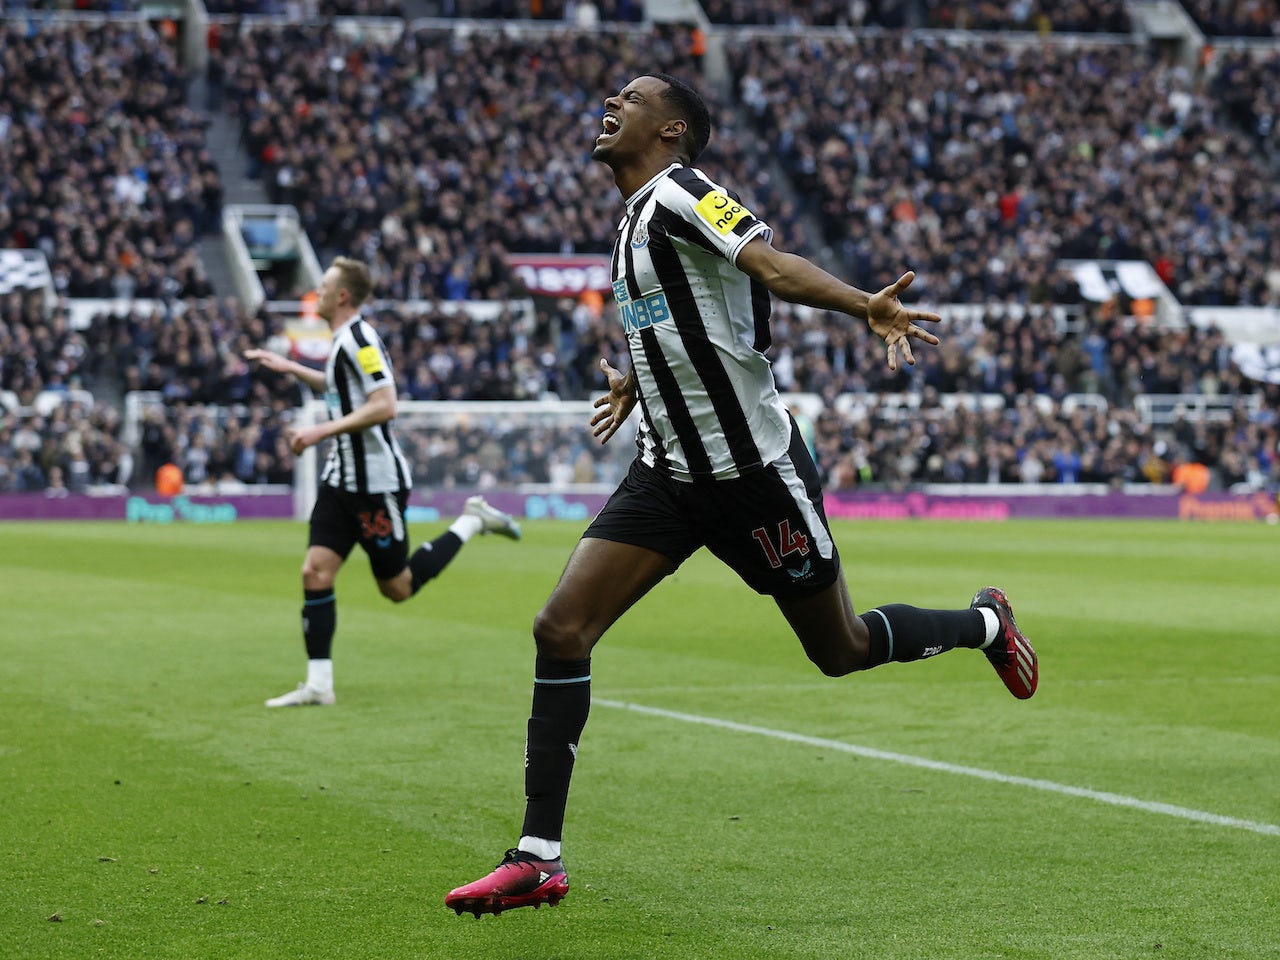 Newcastle United move into fifth with home win over Wolverhampton Wanderers